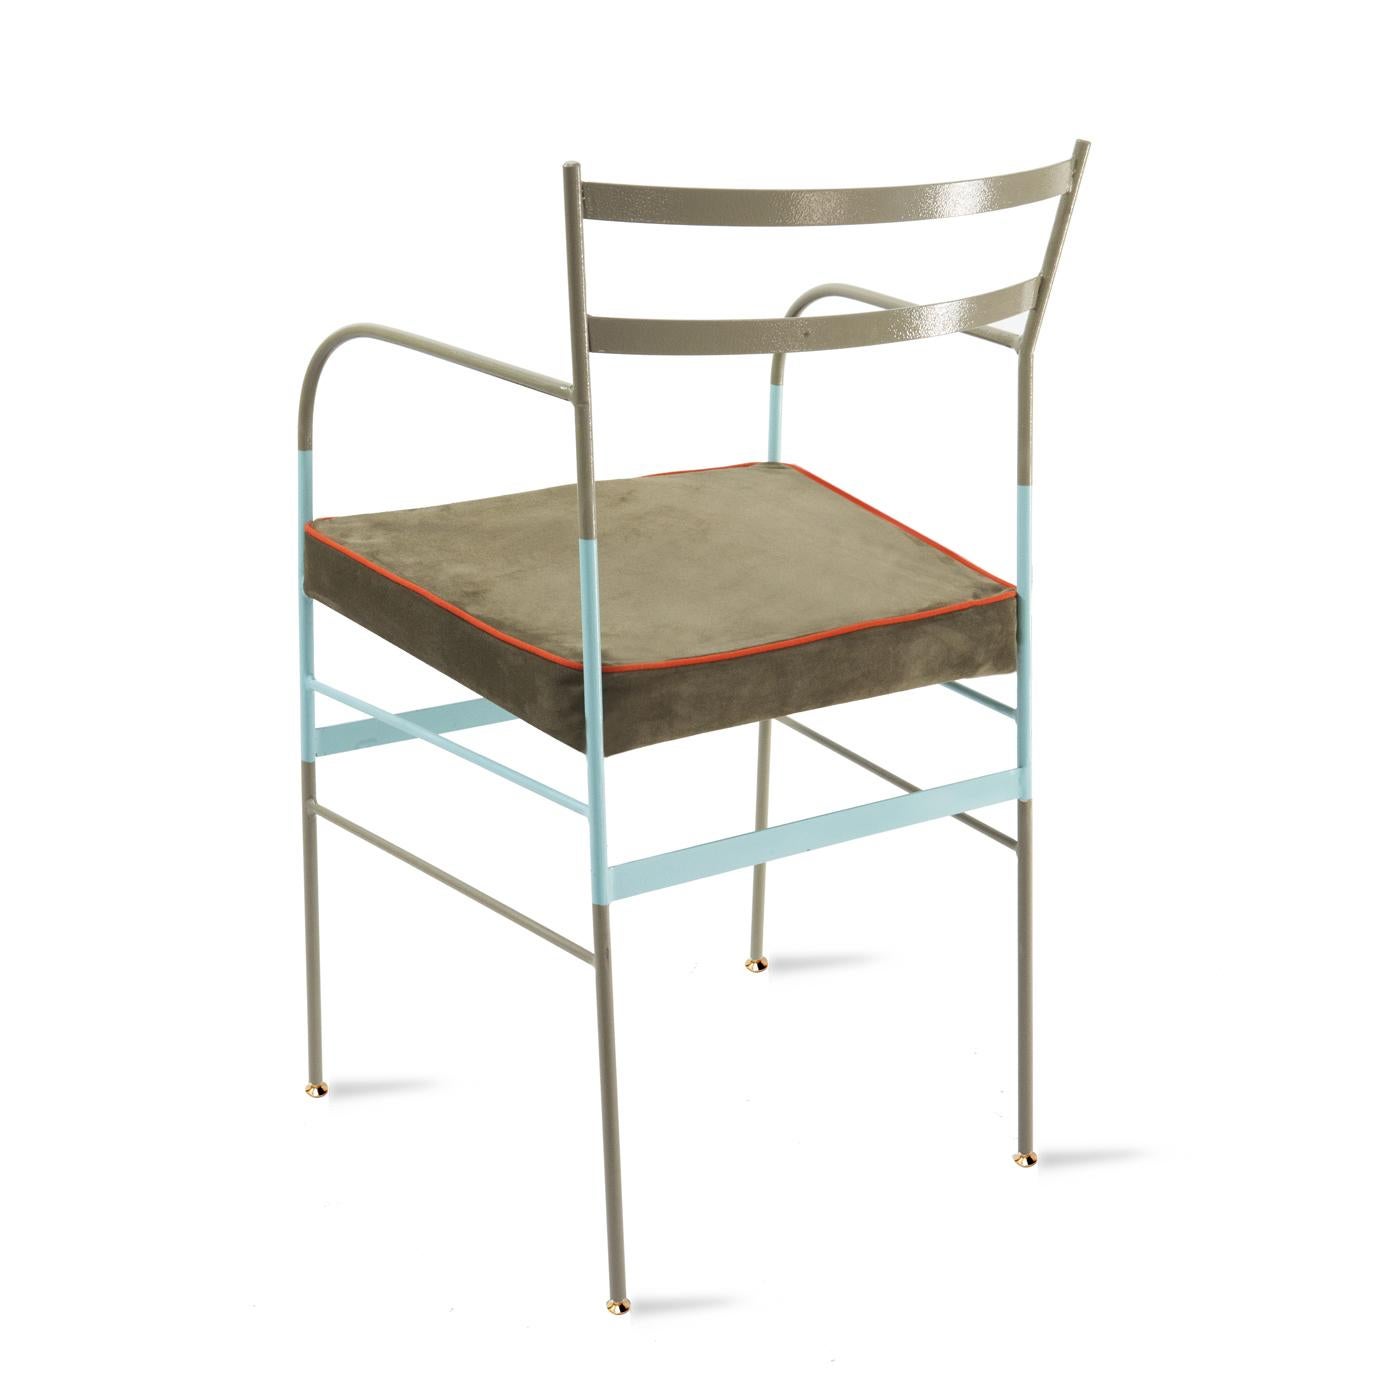 Bold piping on graceful tones of suede produces a neo-retro quality, finished with a uniquely organic compound paint and polish to prevent rust. Handcrafted in Italy from high-strength iron, these garden chairs by Sotow boast both style and